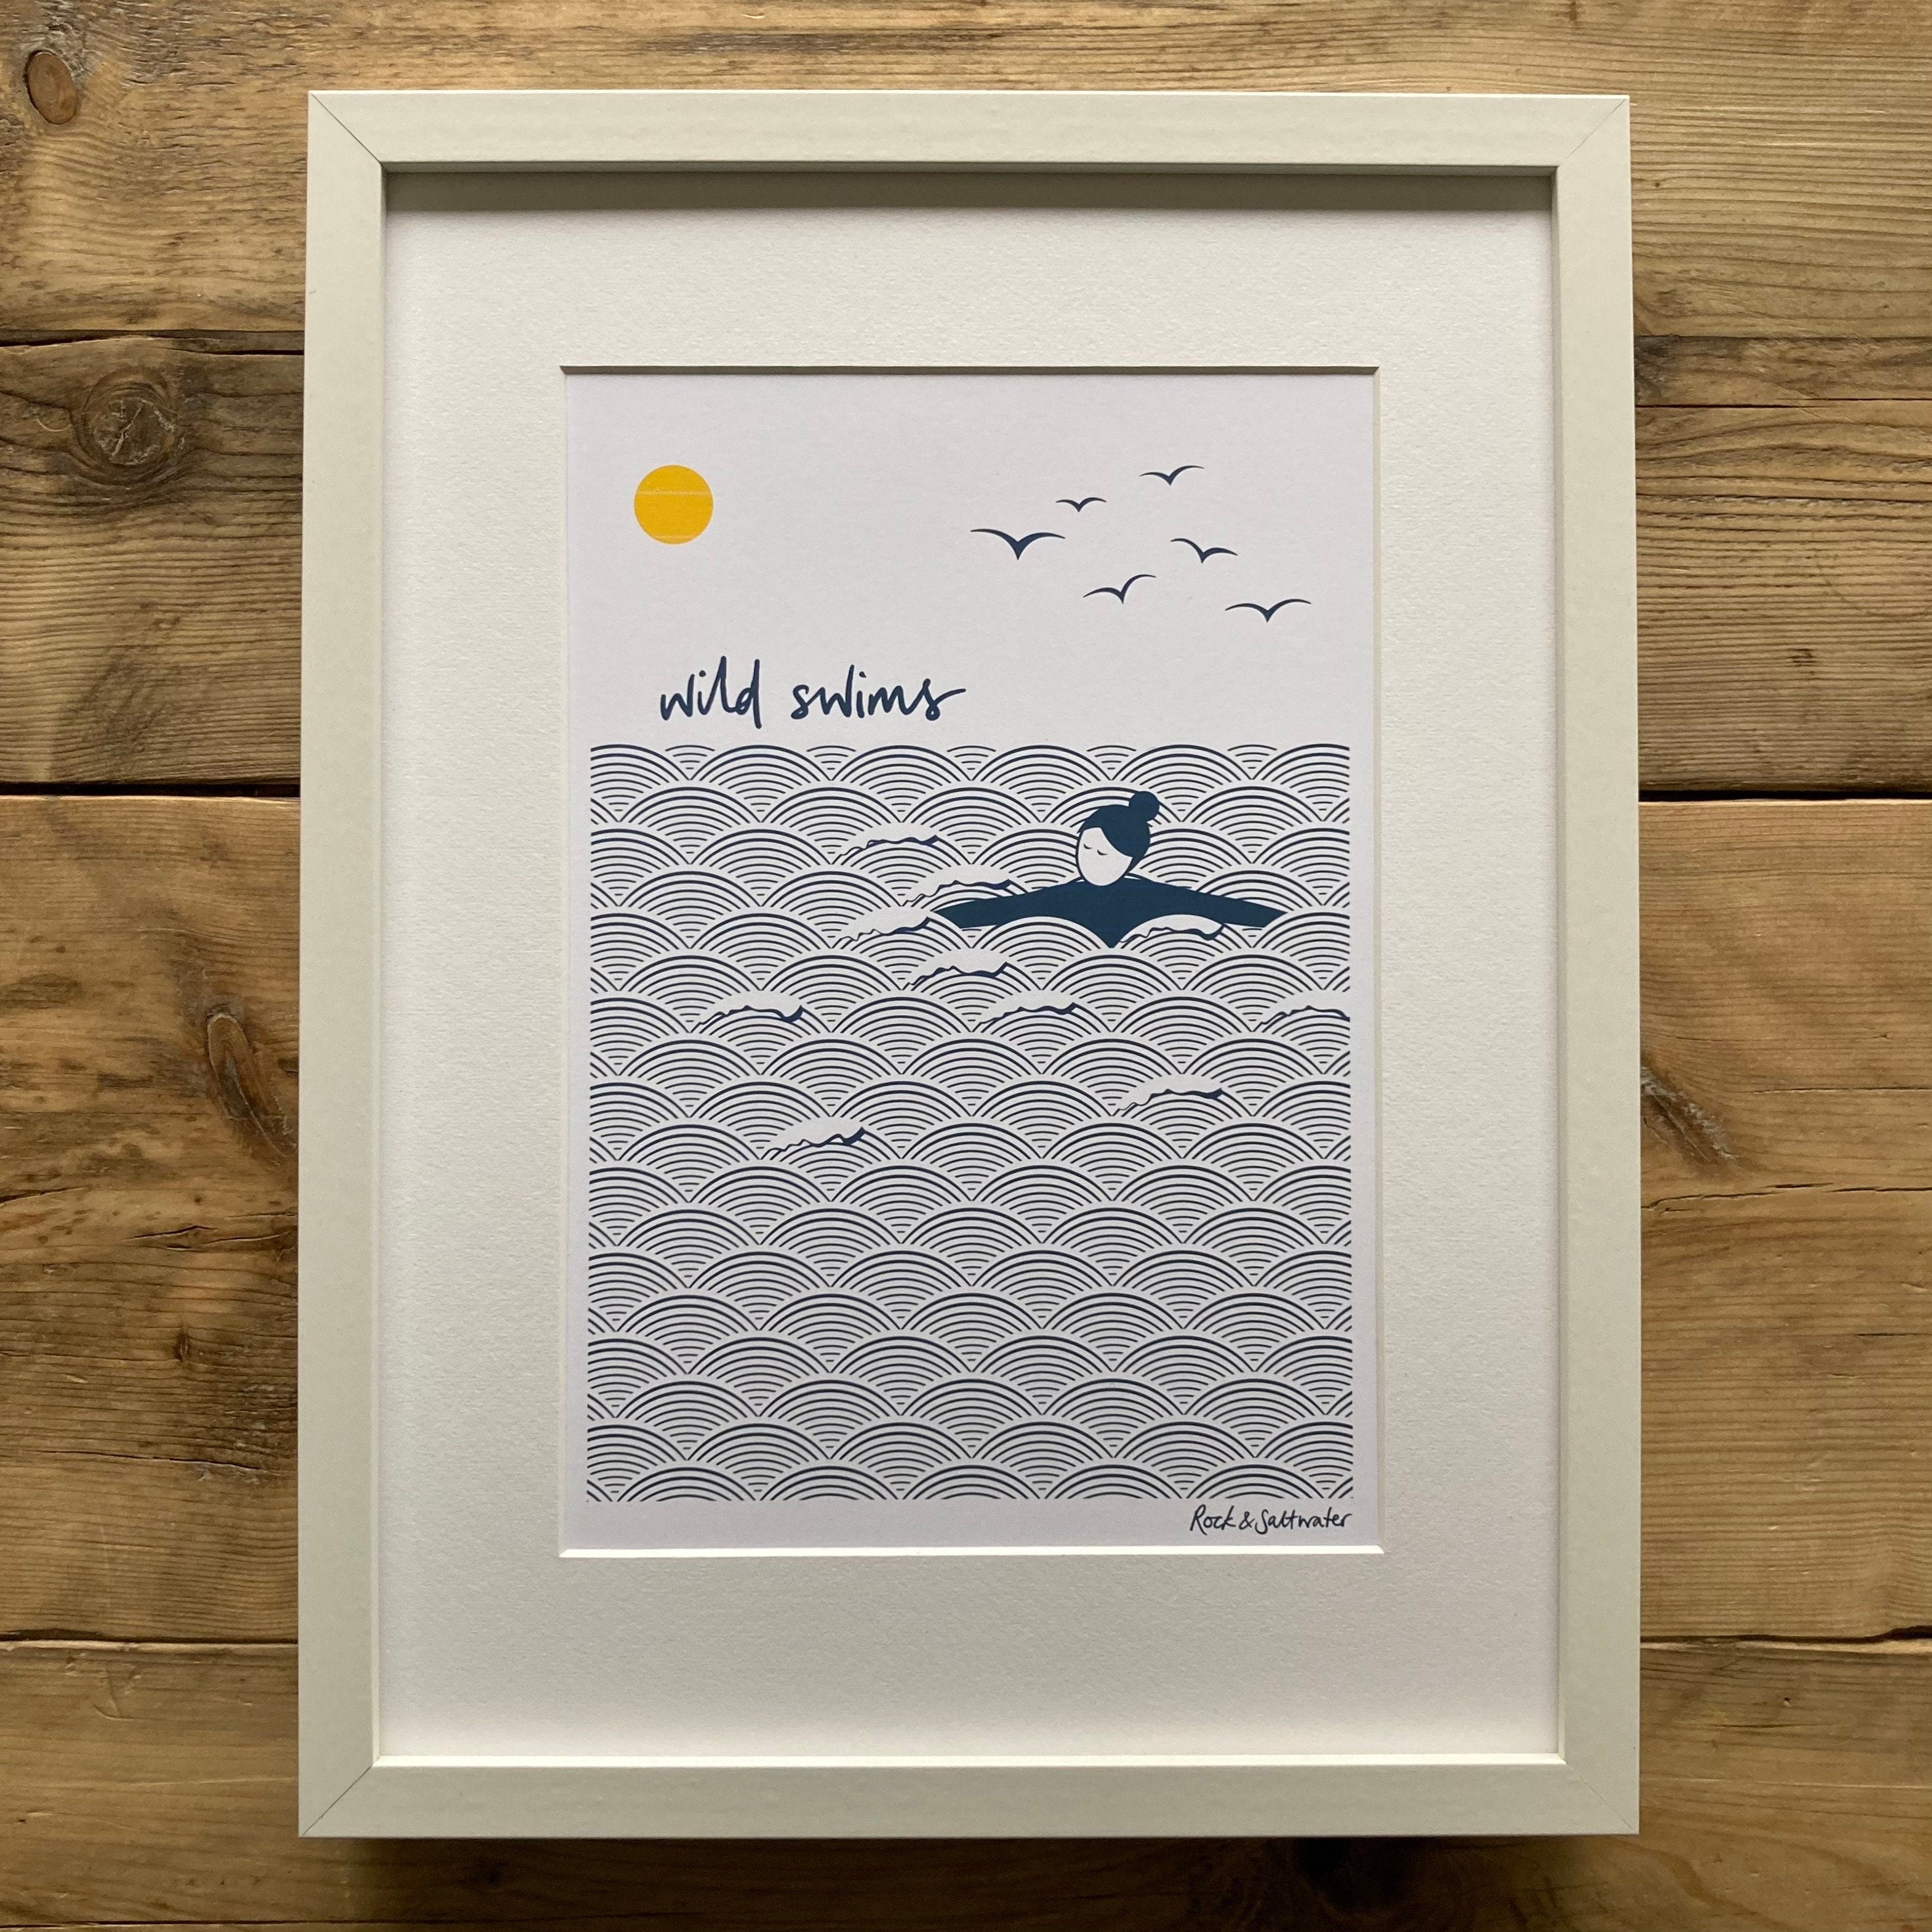 Gift set for a wild swimmer - A5 print and A6 notebook